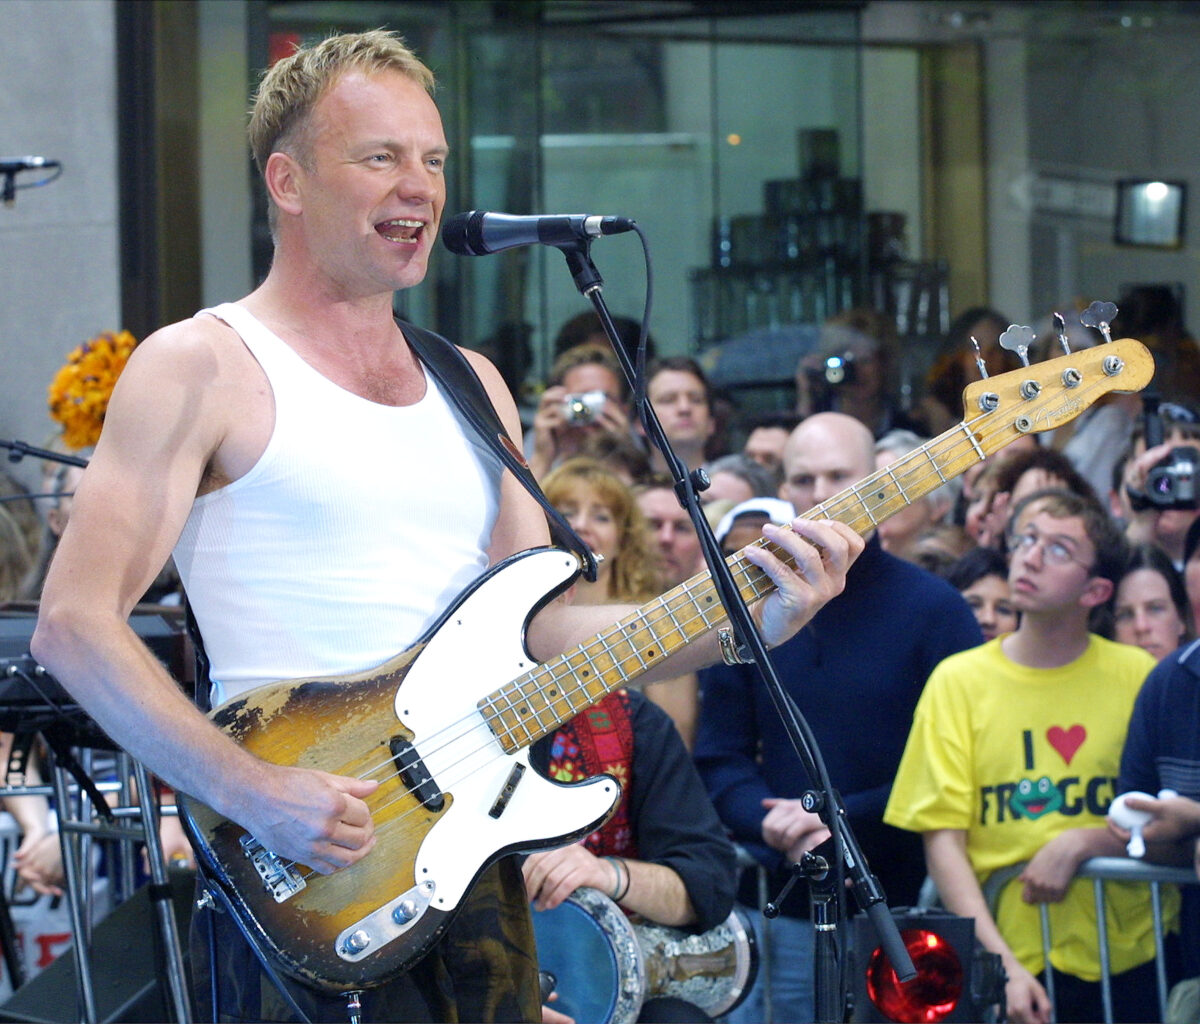 Rock star Sting throughout his storied career